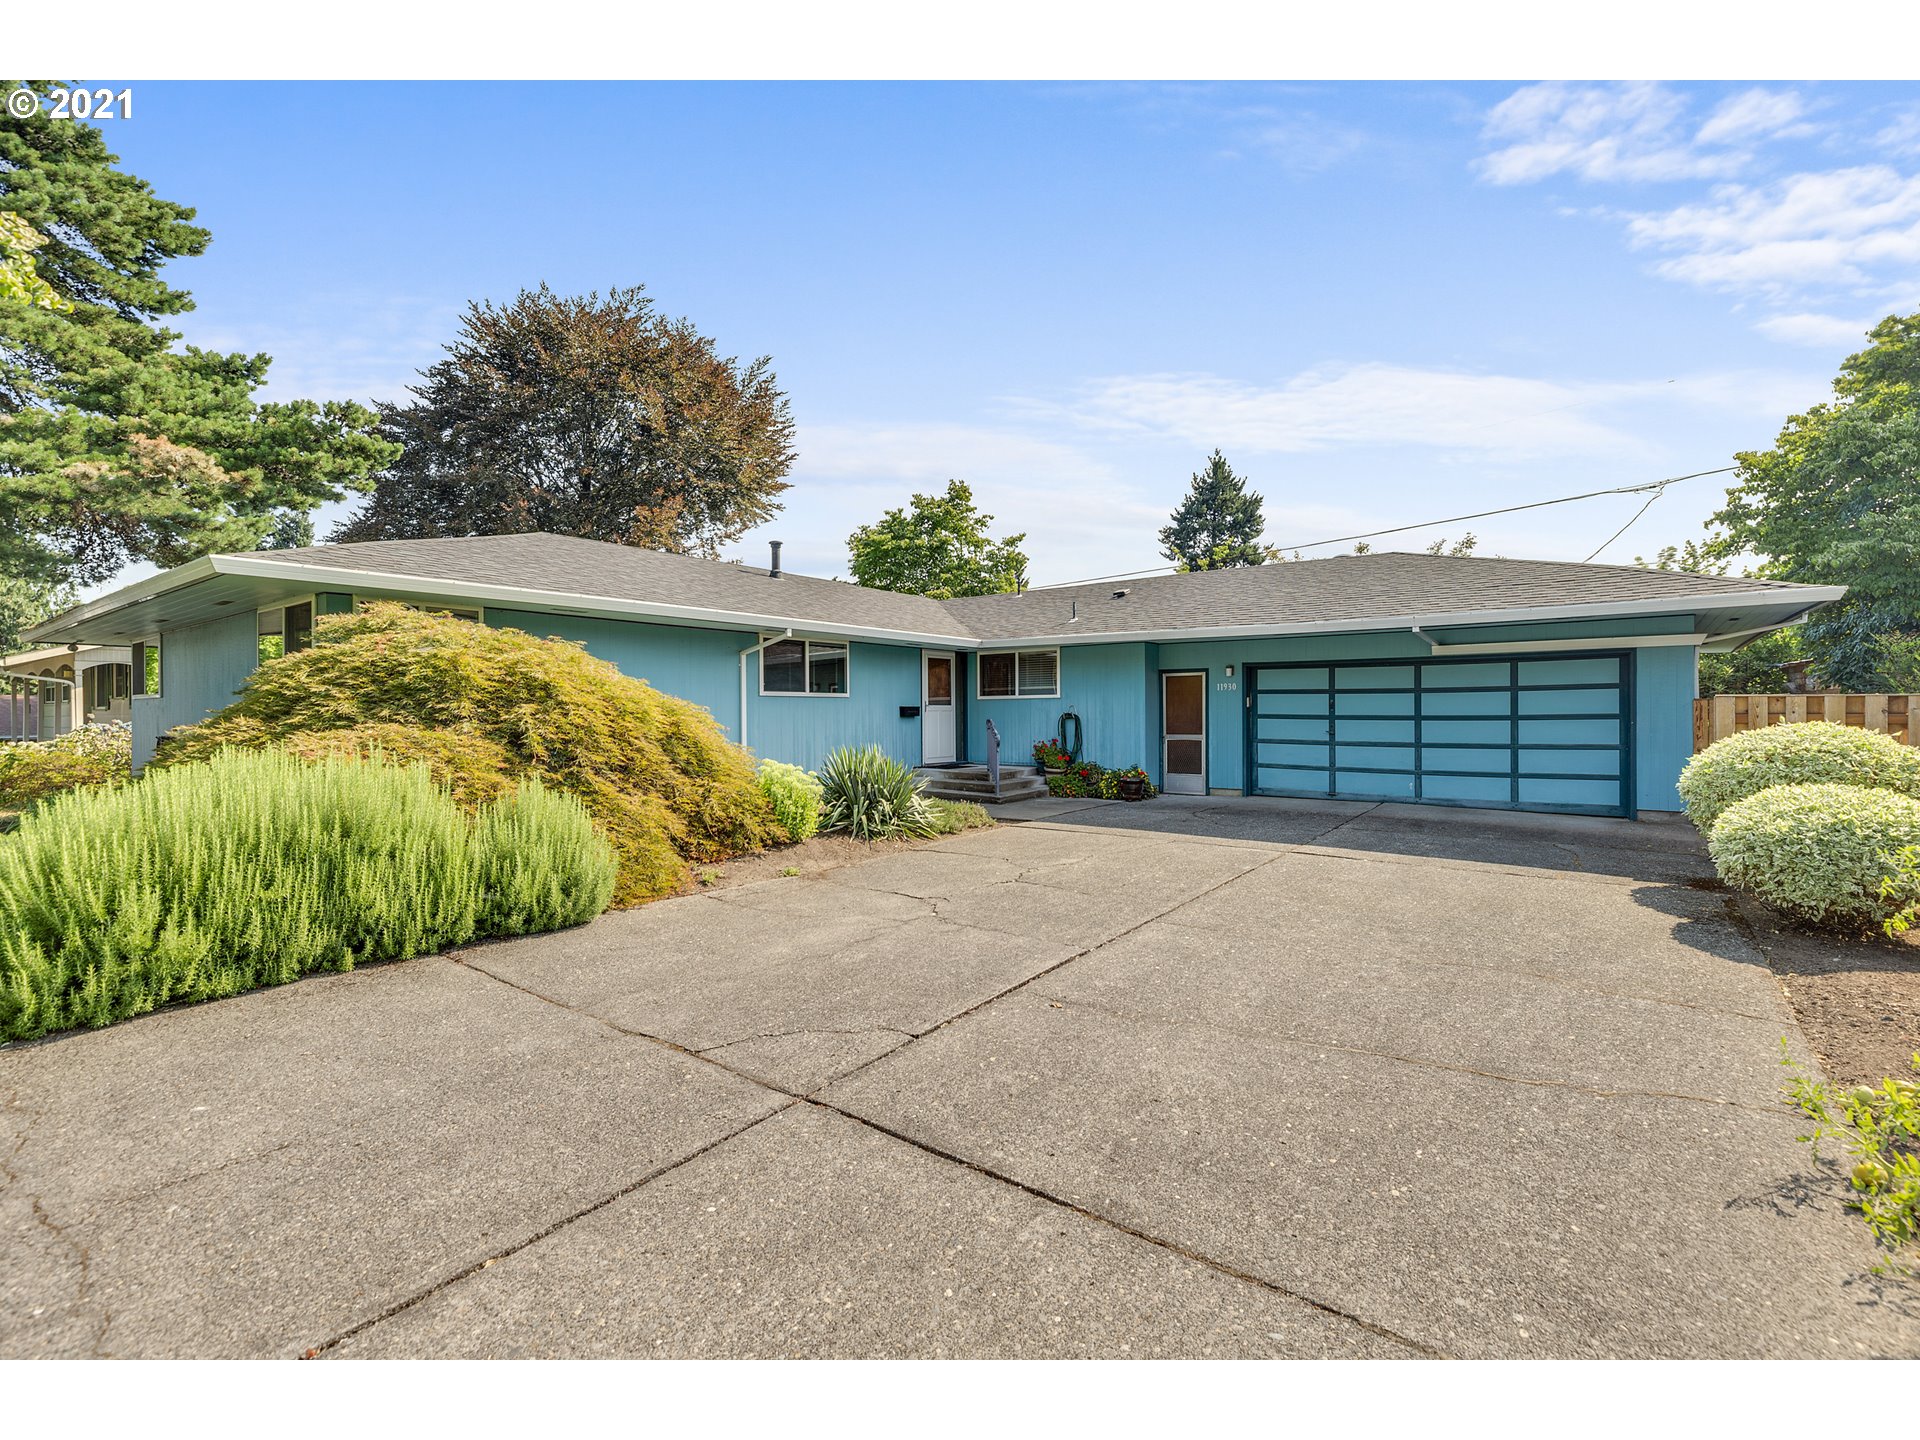 11930 SE 36TH AVE, Milwaukie, OR 